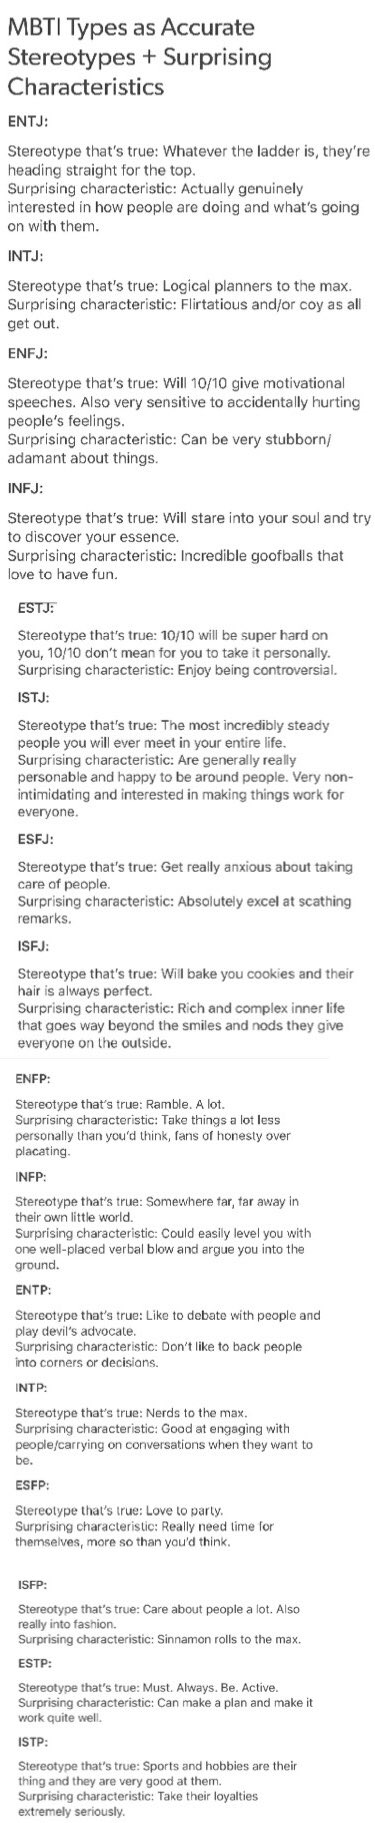 All MBTI types MBTI Stereotypes: INFJ or INFP?